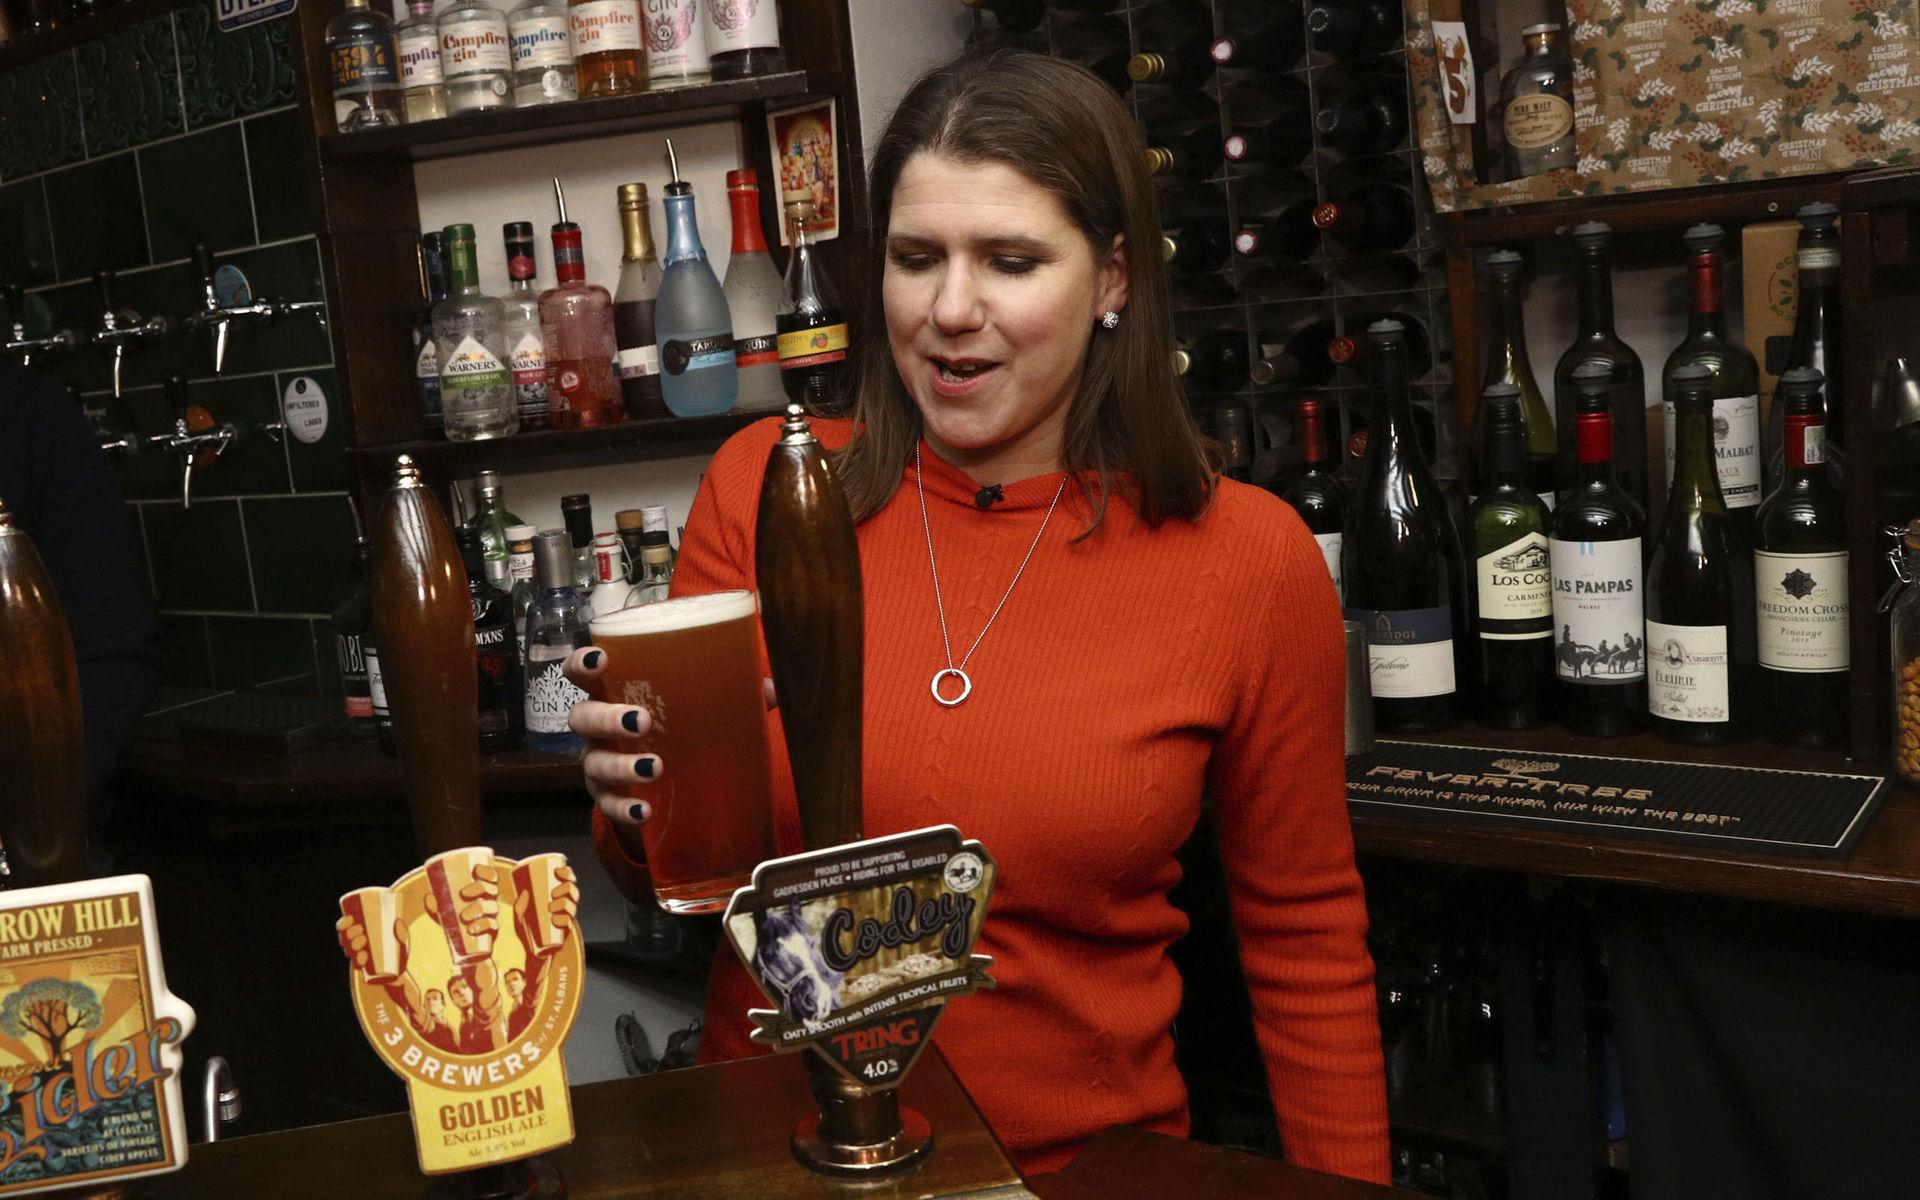 Liberal Democrat Leader Jo Swinson pulls a pint in Dylans - The Kings Arms on Small Business Saturday during her visit to St Albans, while on the General Election campaign trail in England, Saturday, Dec. 7, 2019. Britain goes to the polls on Thursday, Dec. 12. (Aaron Chown/PA via AP)  LLT802